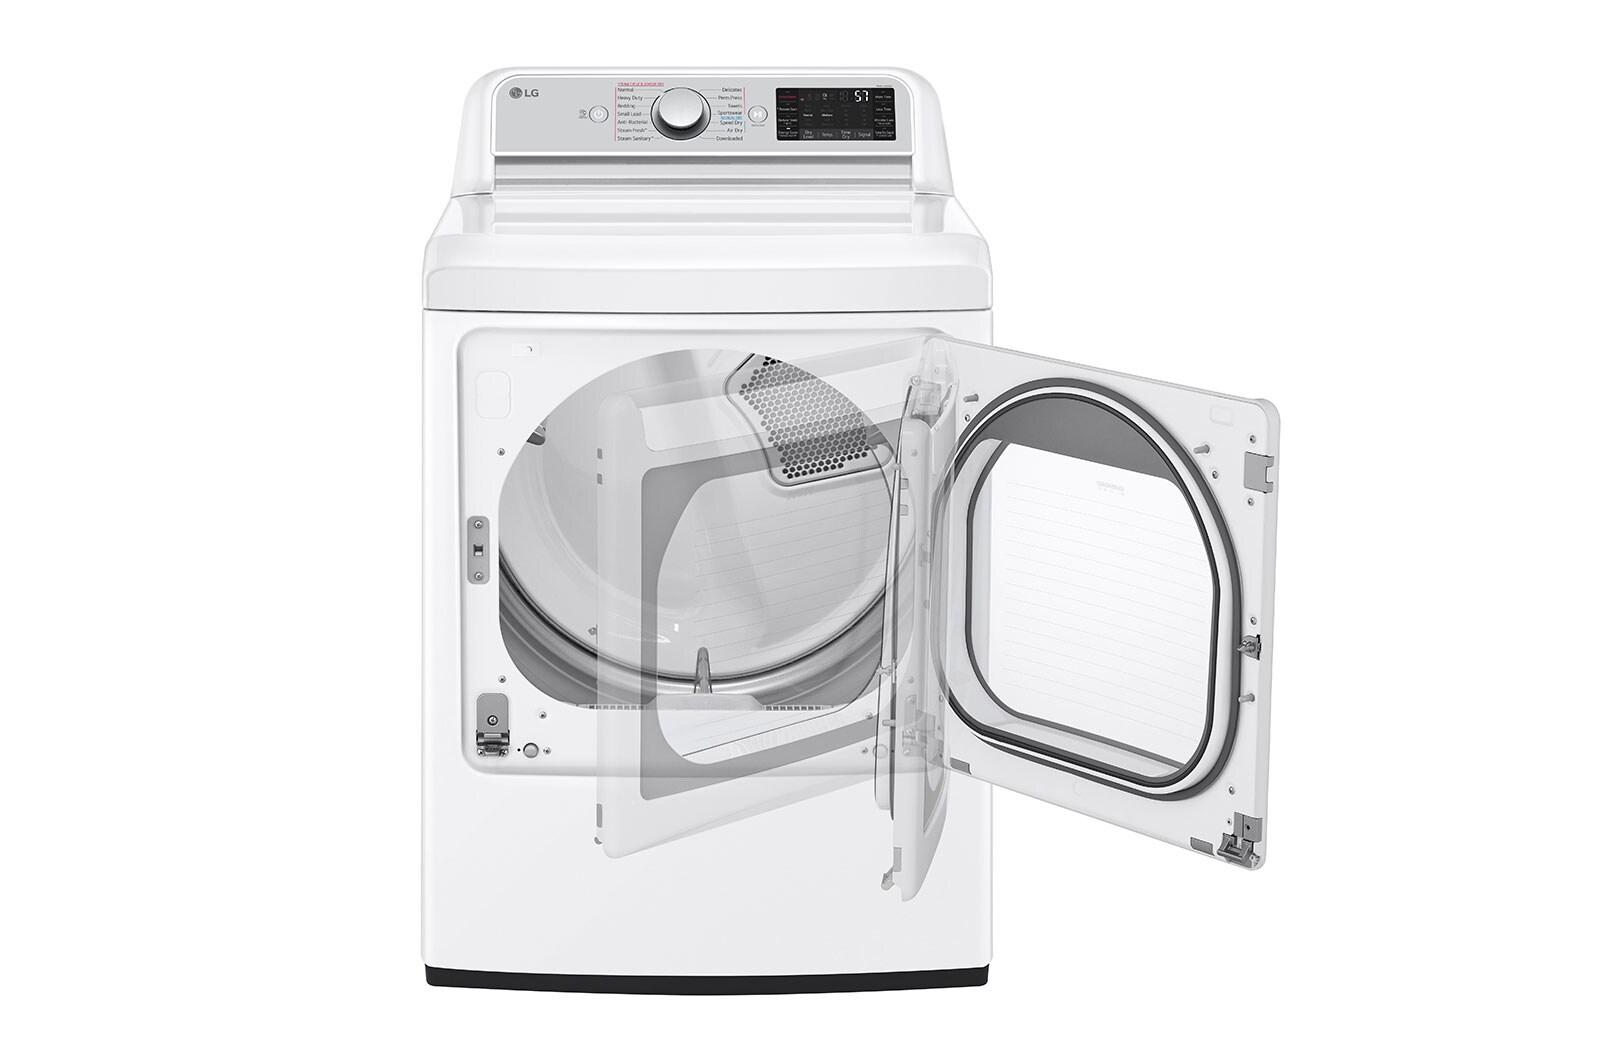 Lg DLGX7901WE 7.3 Cu. Ft. Ultra Large Capacity Smart Wi-Fi Enabled Rear Control Gas Dryer With Turbosteam™